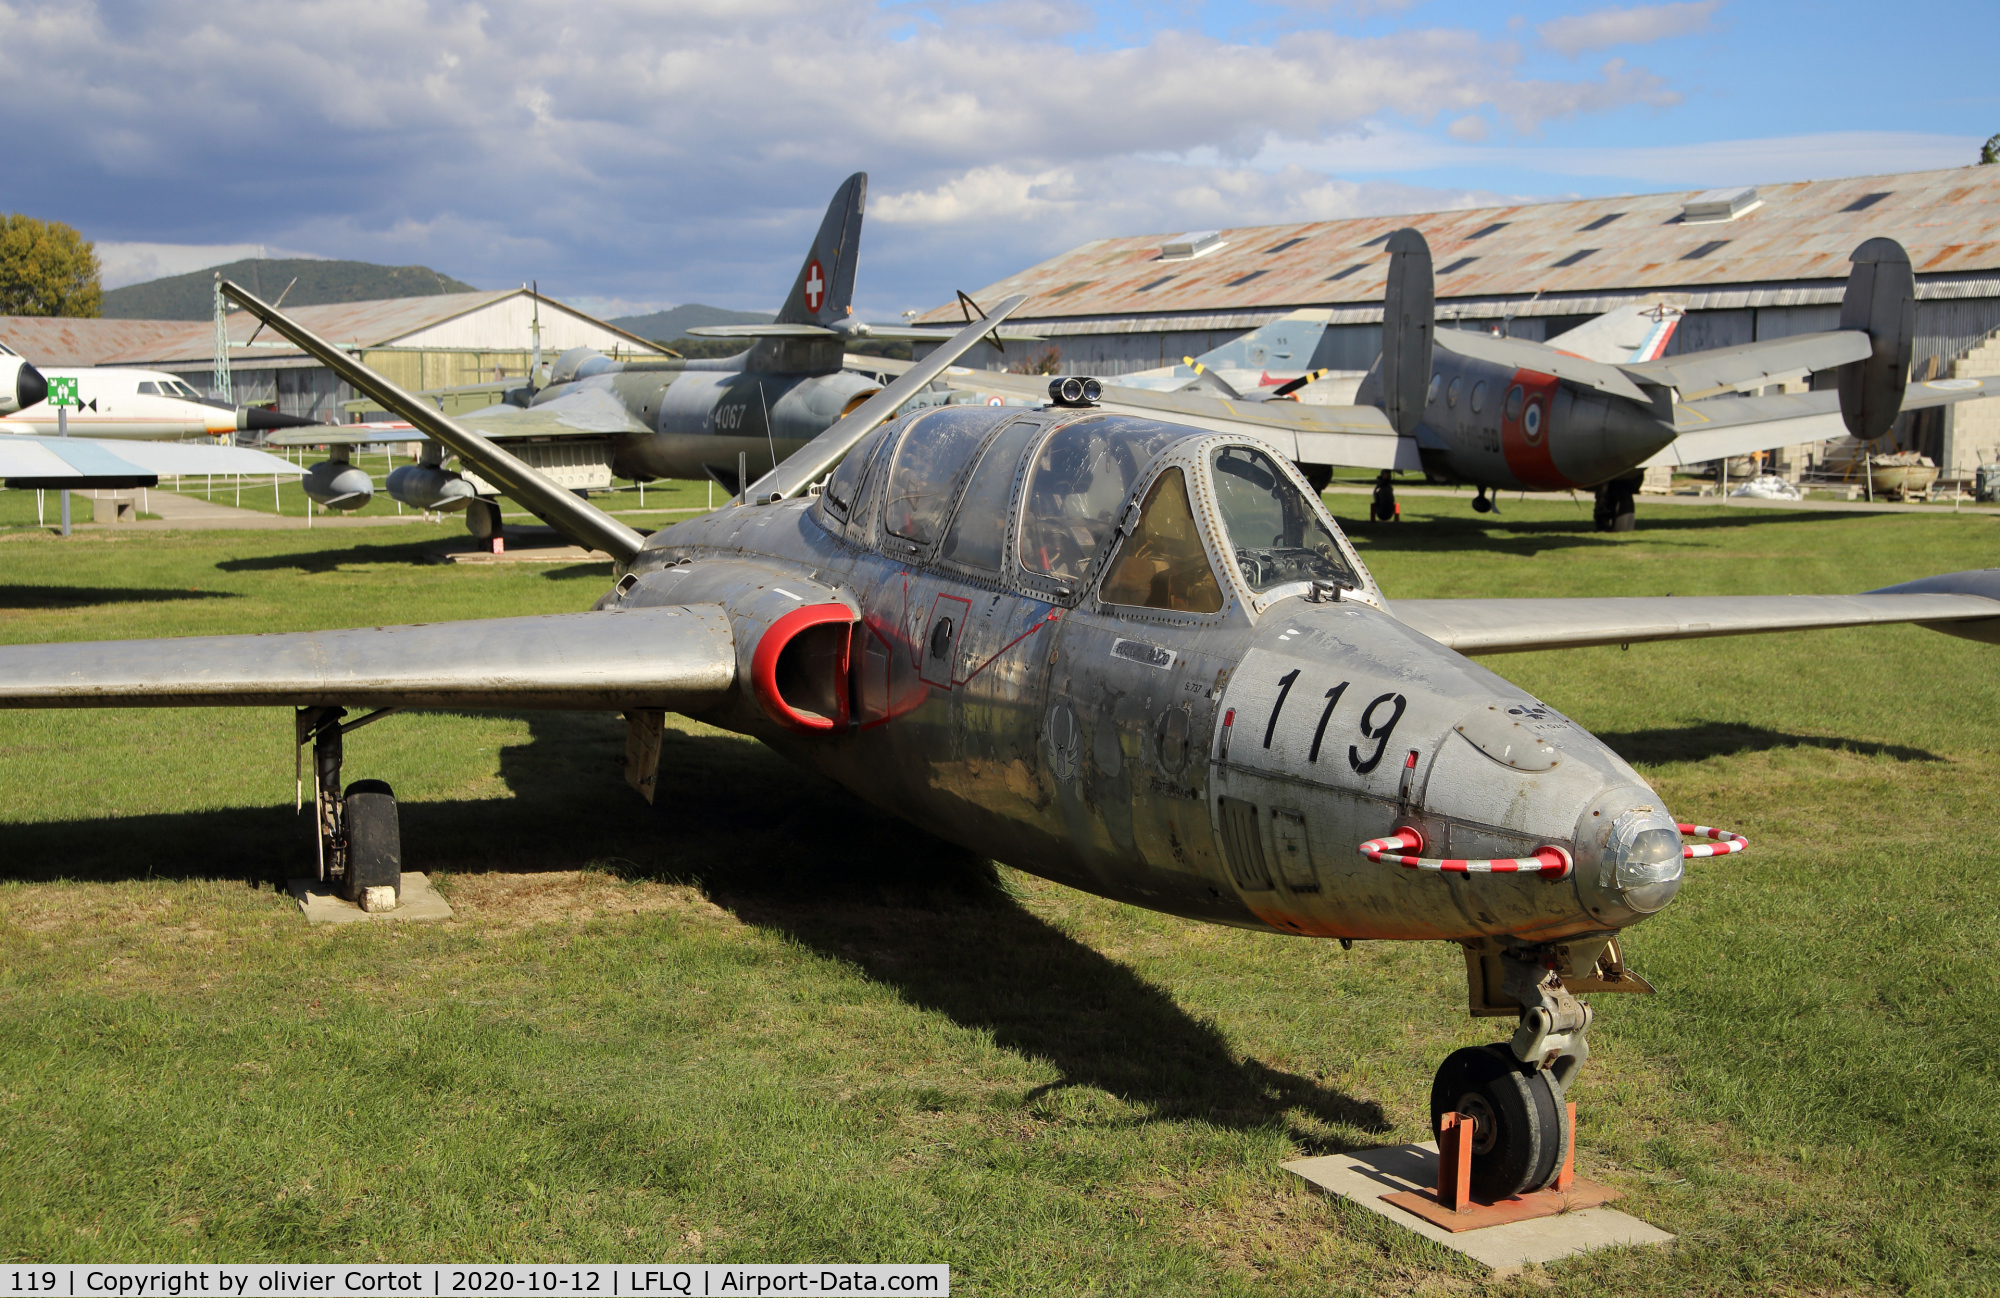 119, Fouga CM-170 Magister C/N 119, the weather is not kind with this Fouga...